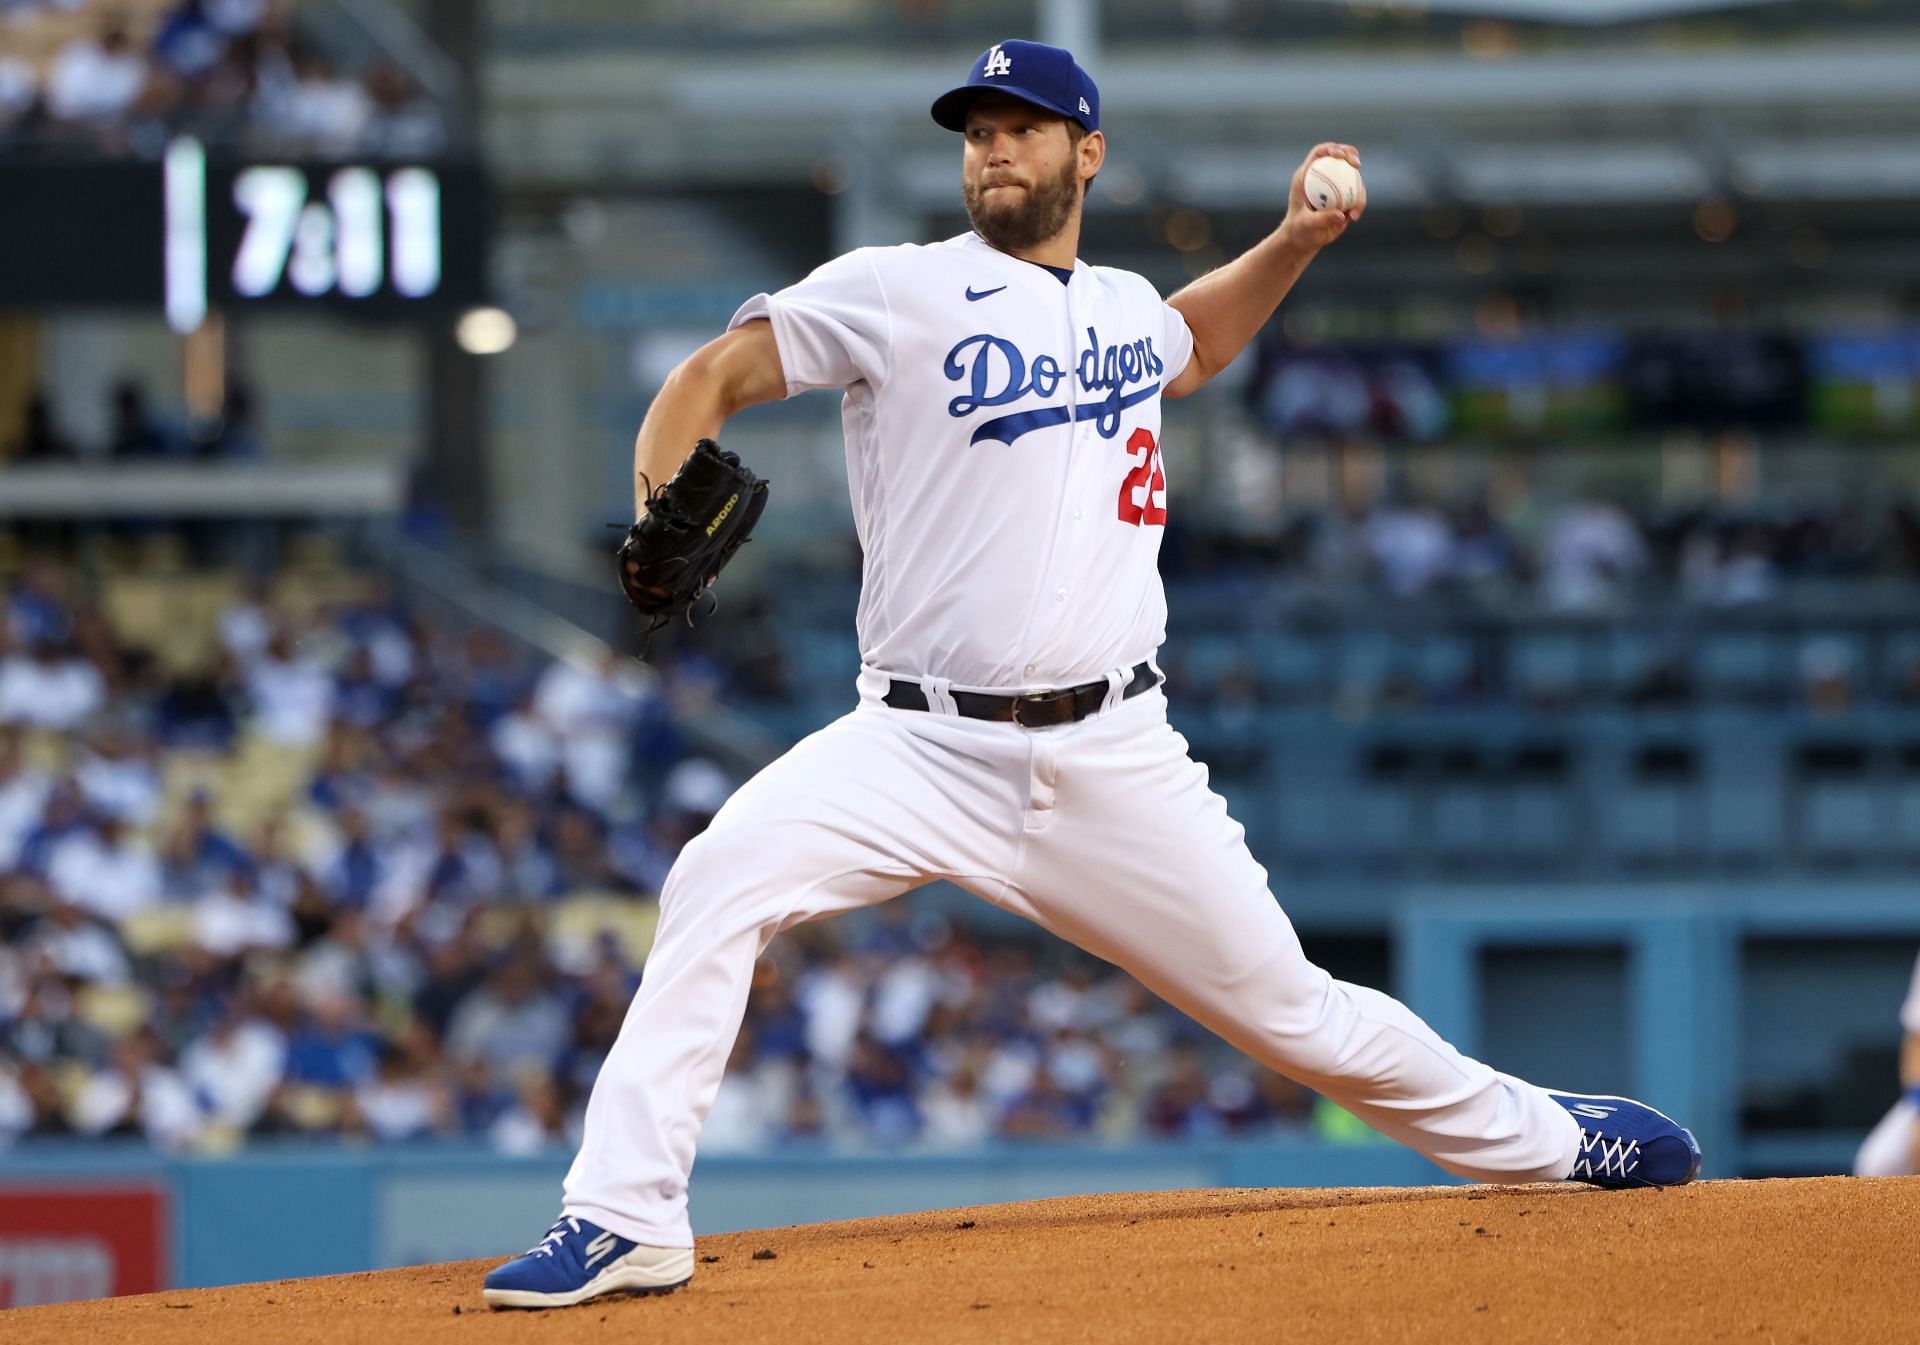 Kershaw holds numerous Dodgers records, a World Series ring, and an NL MVP, but it appears as though the 16-year veteran still has gas left in the tank.